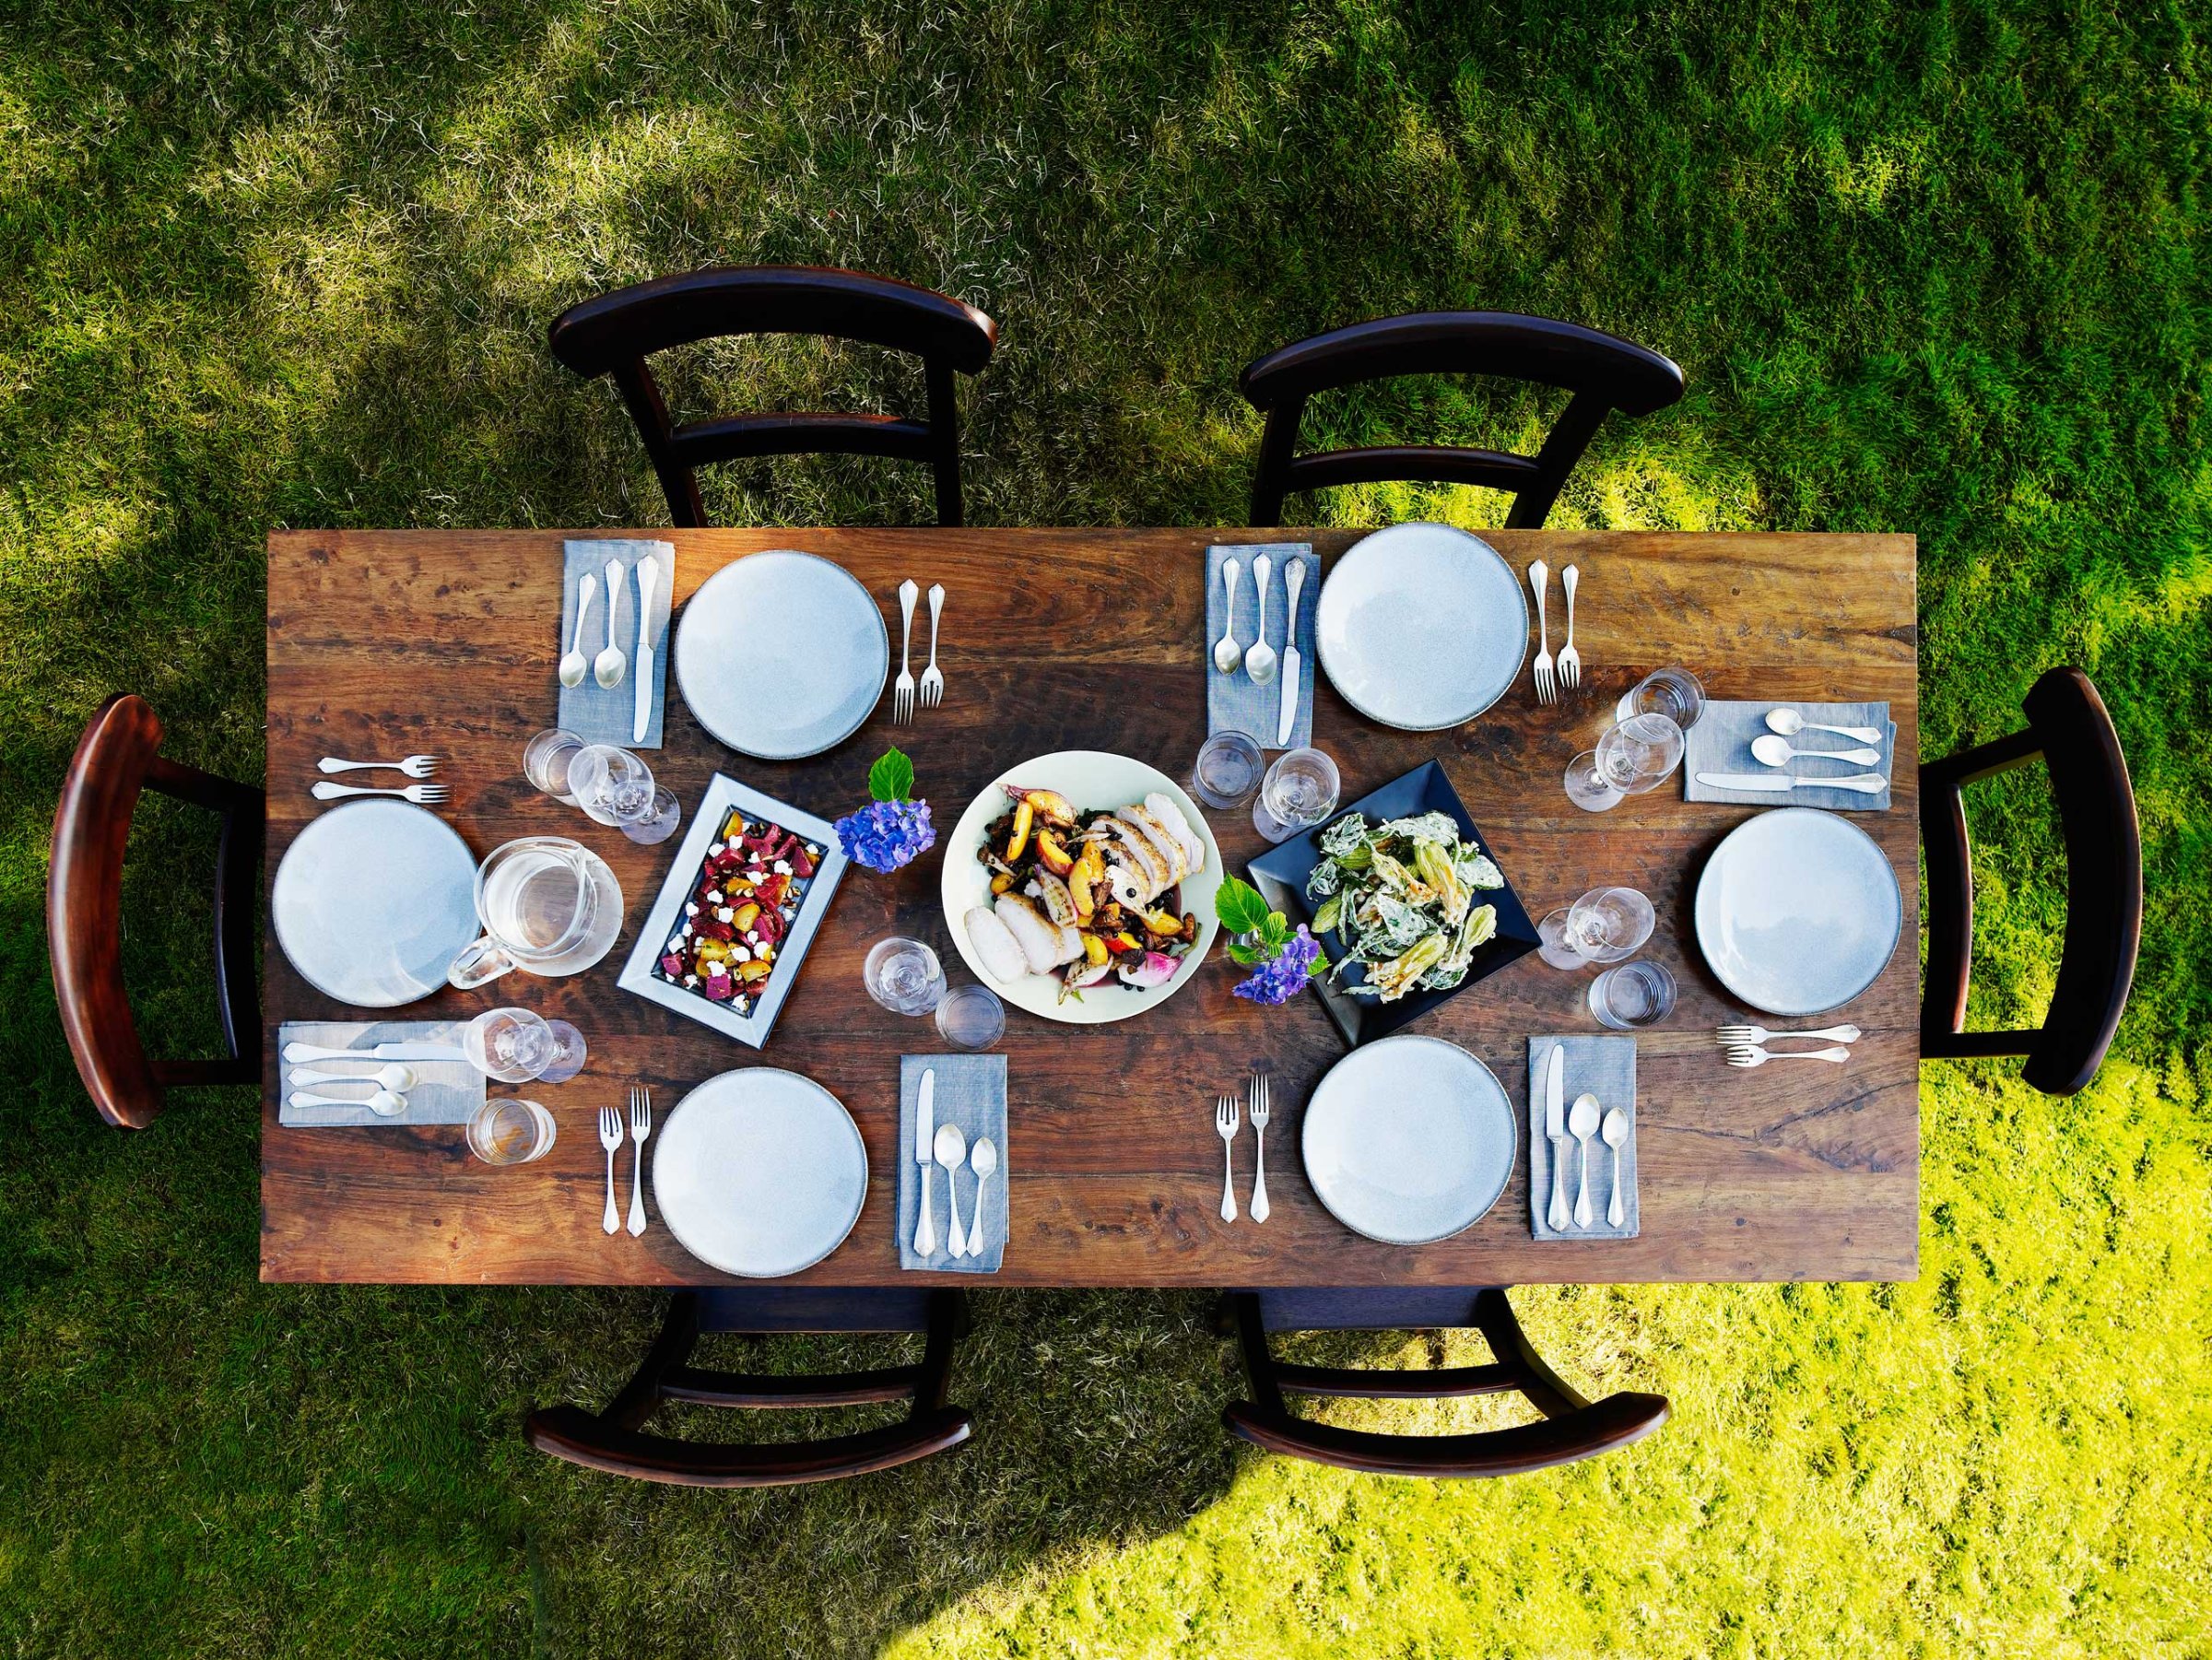 Set dinner table outside on grass lawn